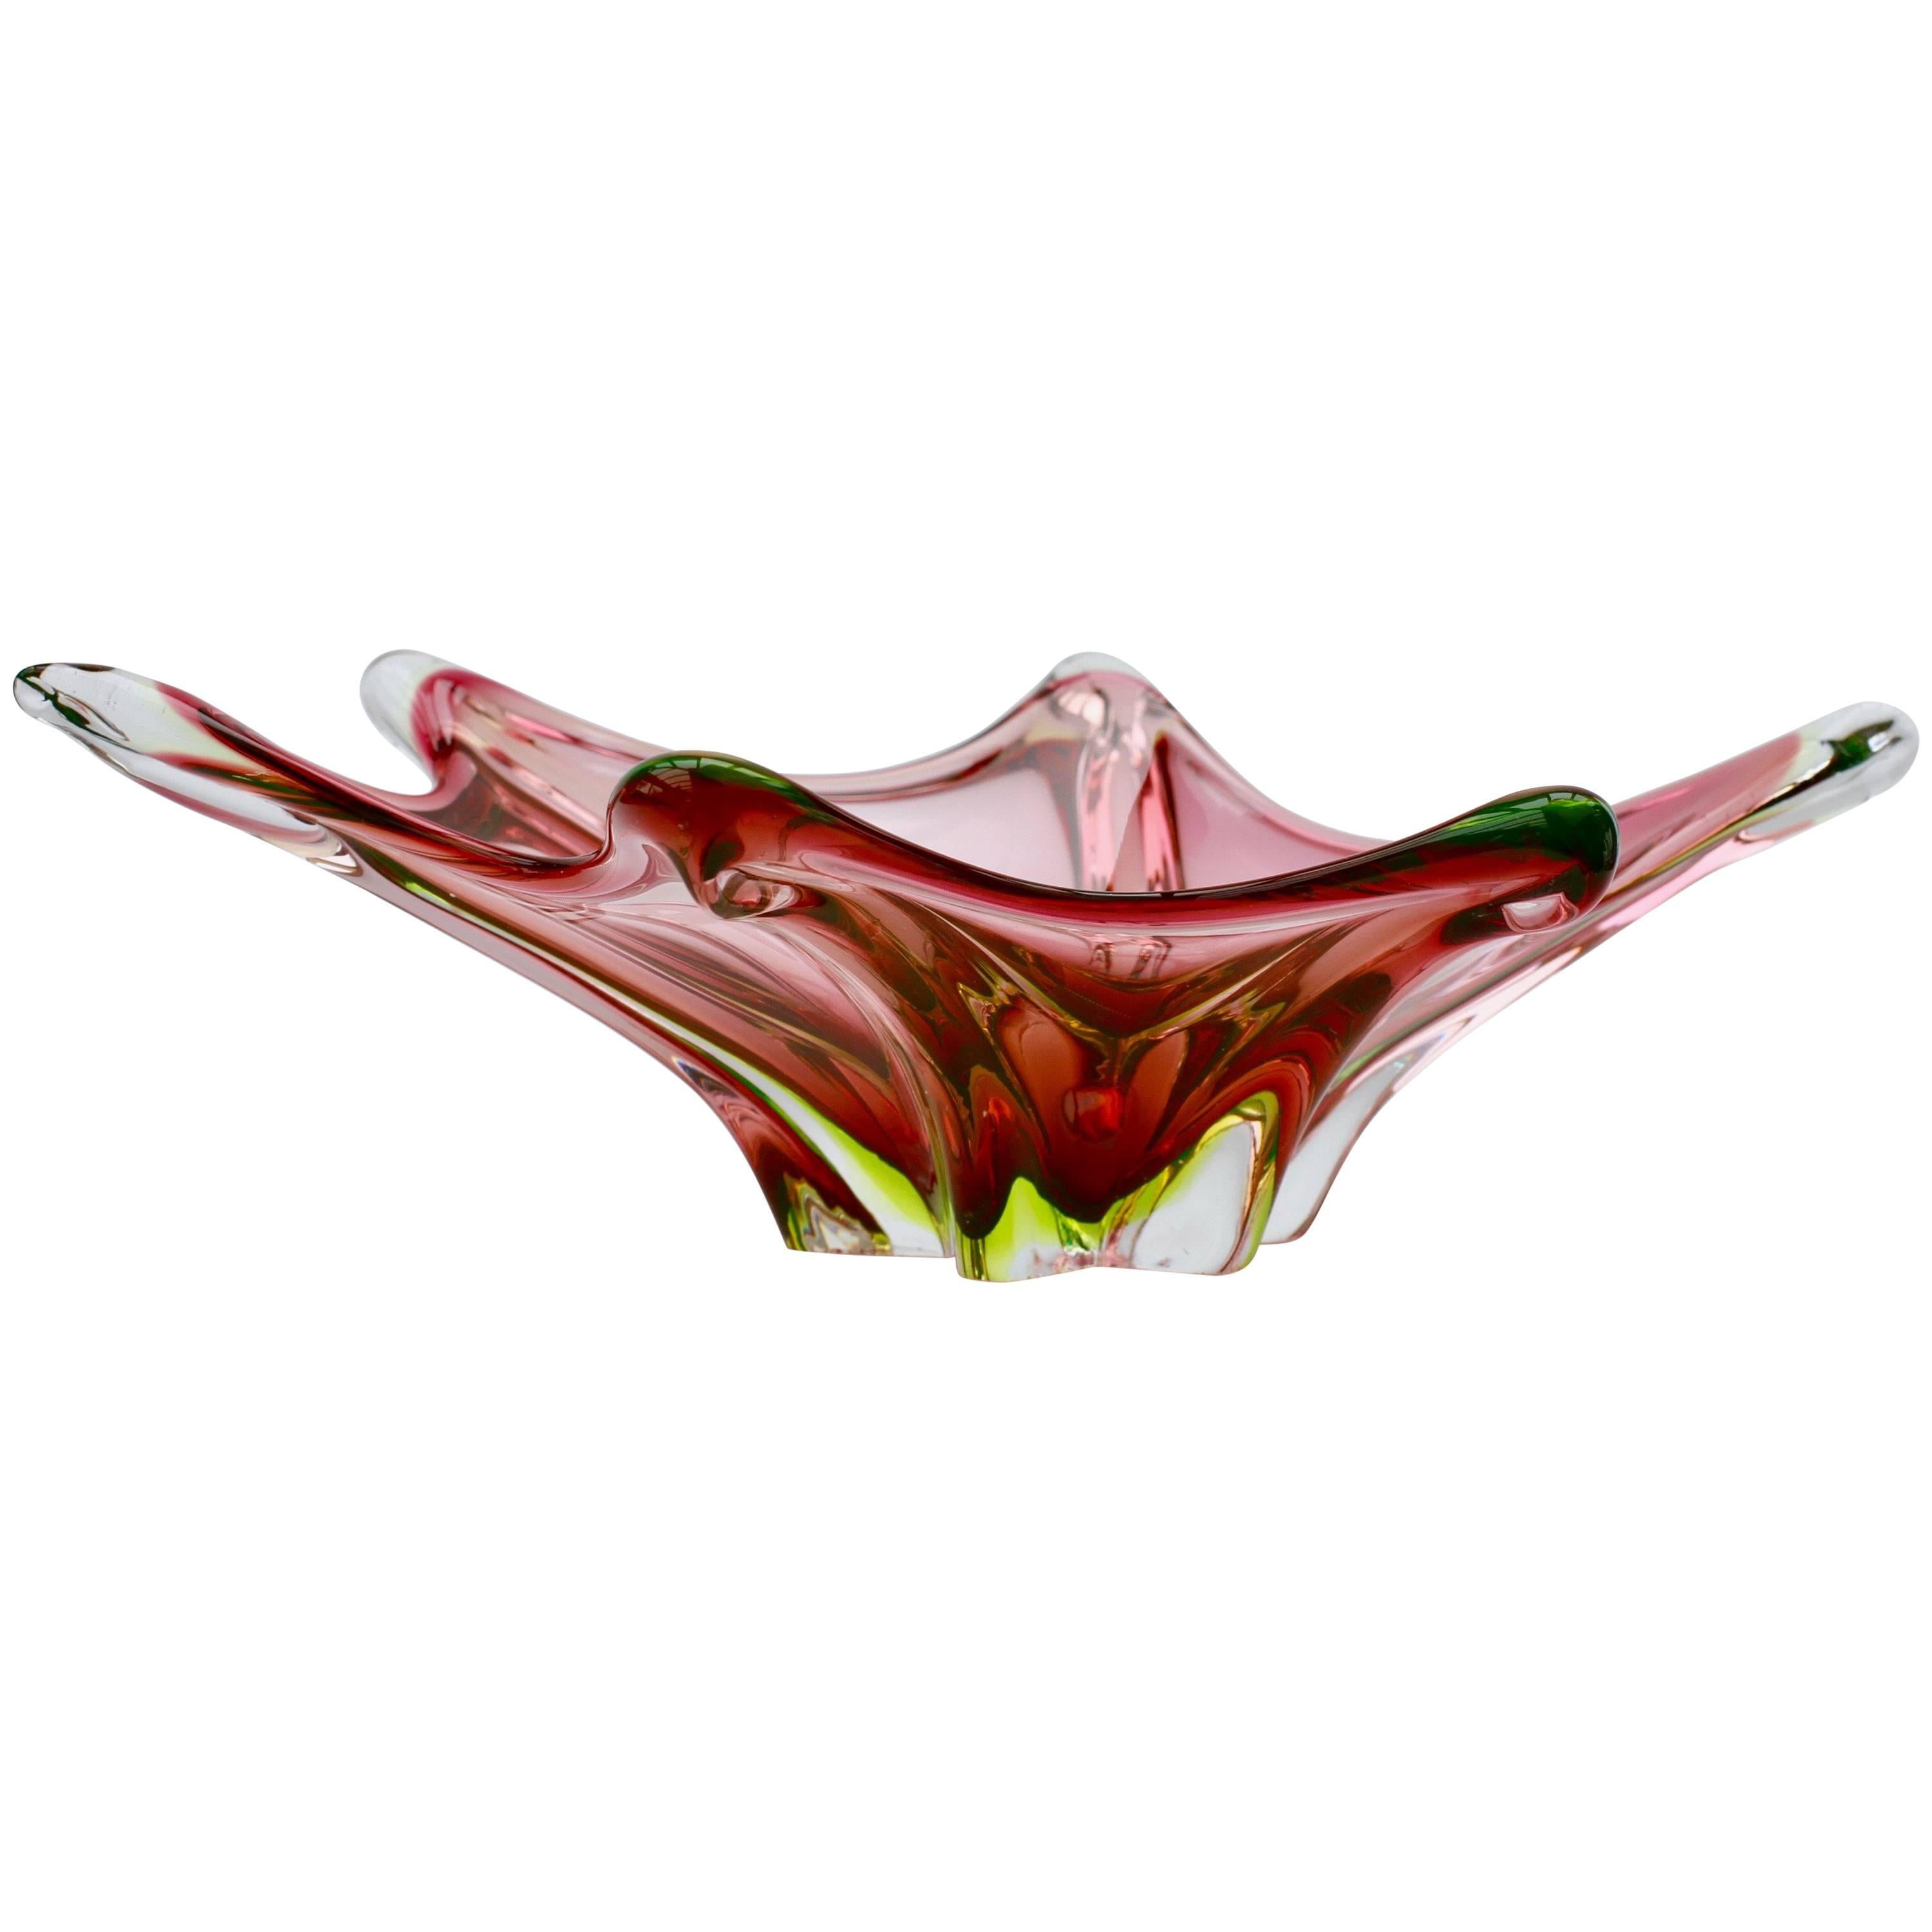 Vintage Mid-Century 'Webbed' Murano Pink and Green Sommerso Glass Bowl c. 1950s